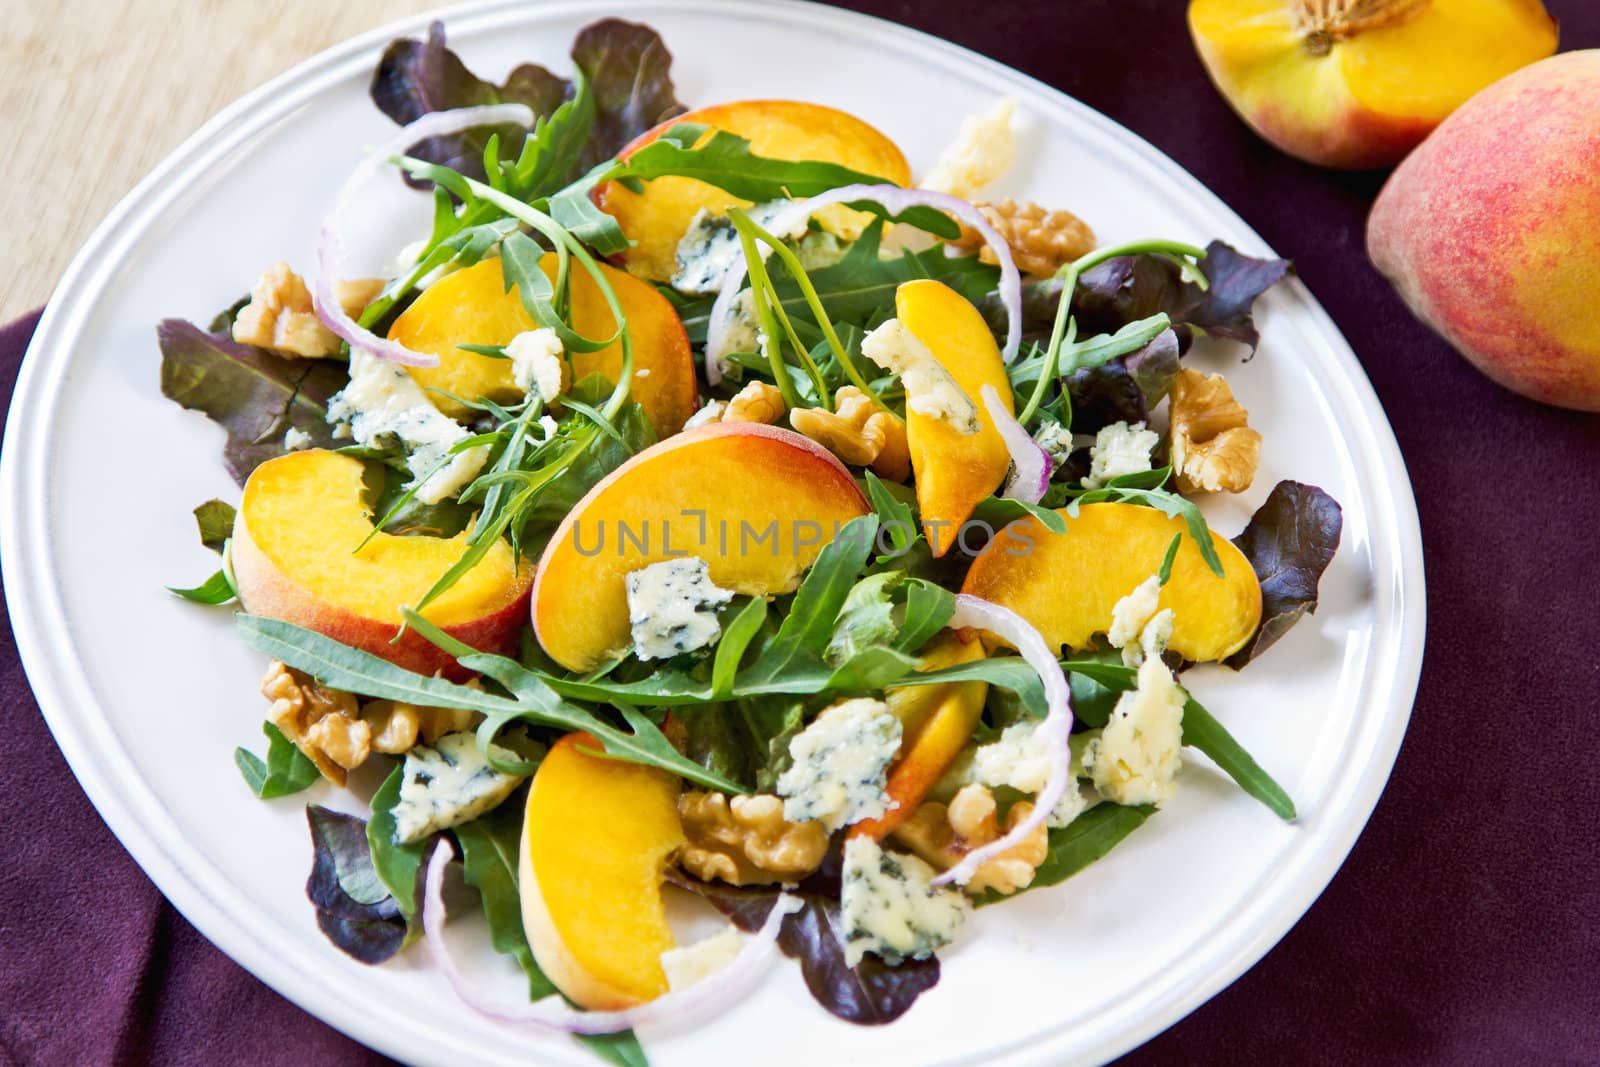 Peach with Blue cheese and Rocket salad by vanillaechoes